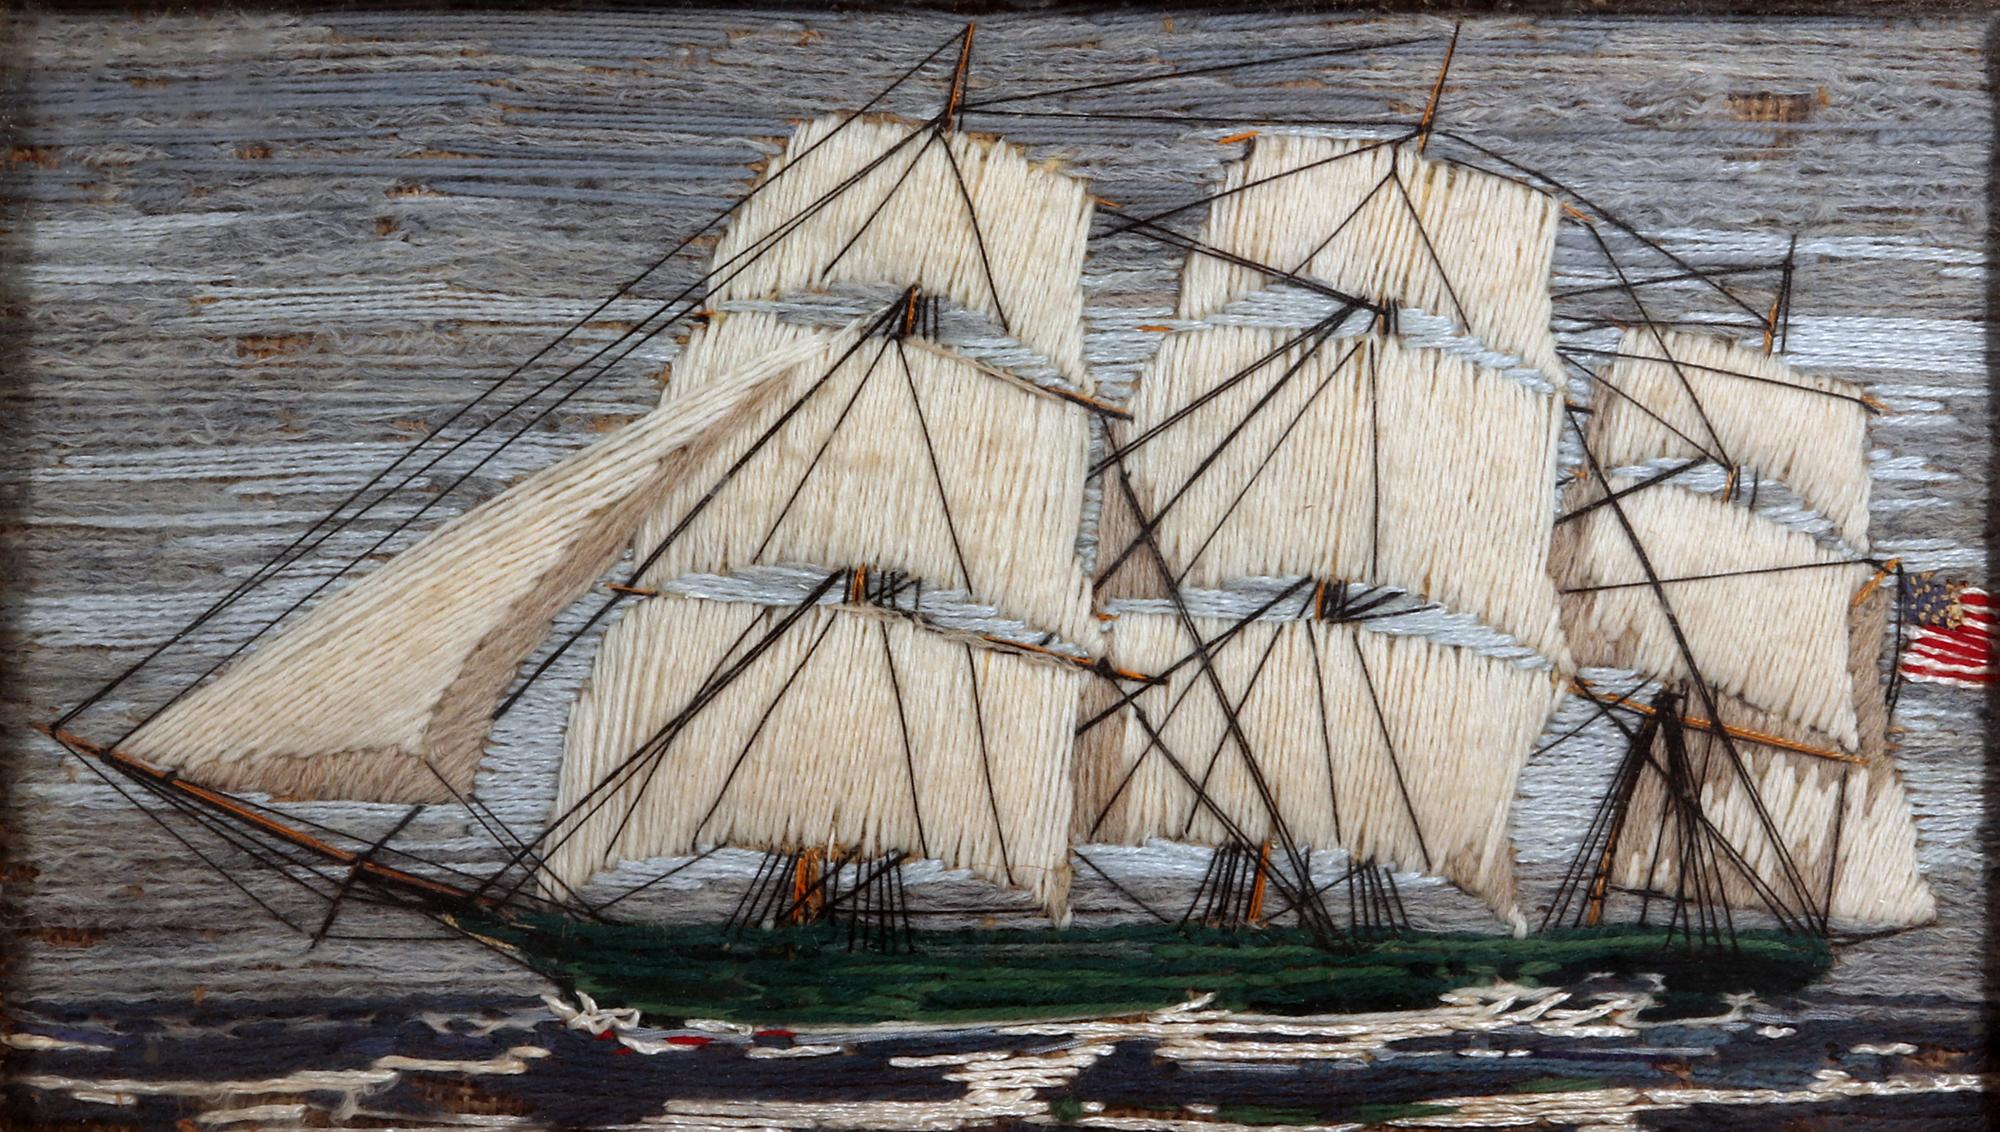 Small American Sailor's woolwork,
Circa 1865-75

The American Sailor's woolwork or woolie depicts a portside view of a fully rigged ship under full sail. The ship has an unusual green hull and flies the Stars & Stripes from the Mizen mast. The